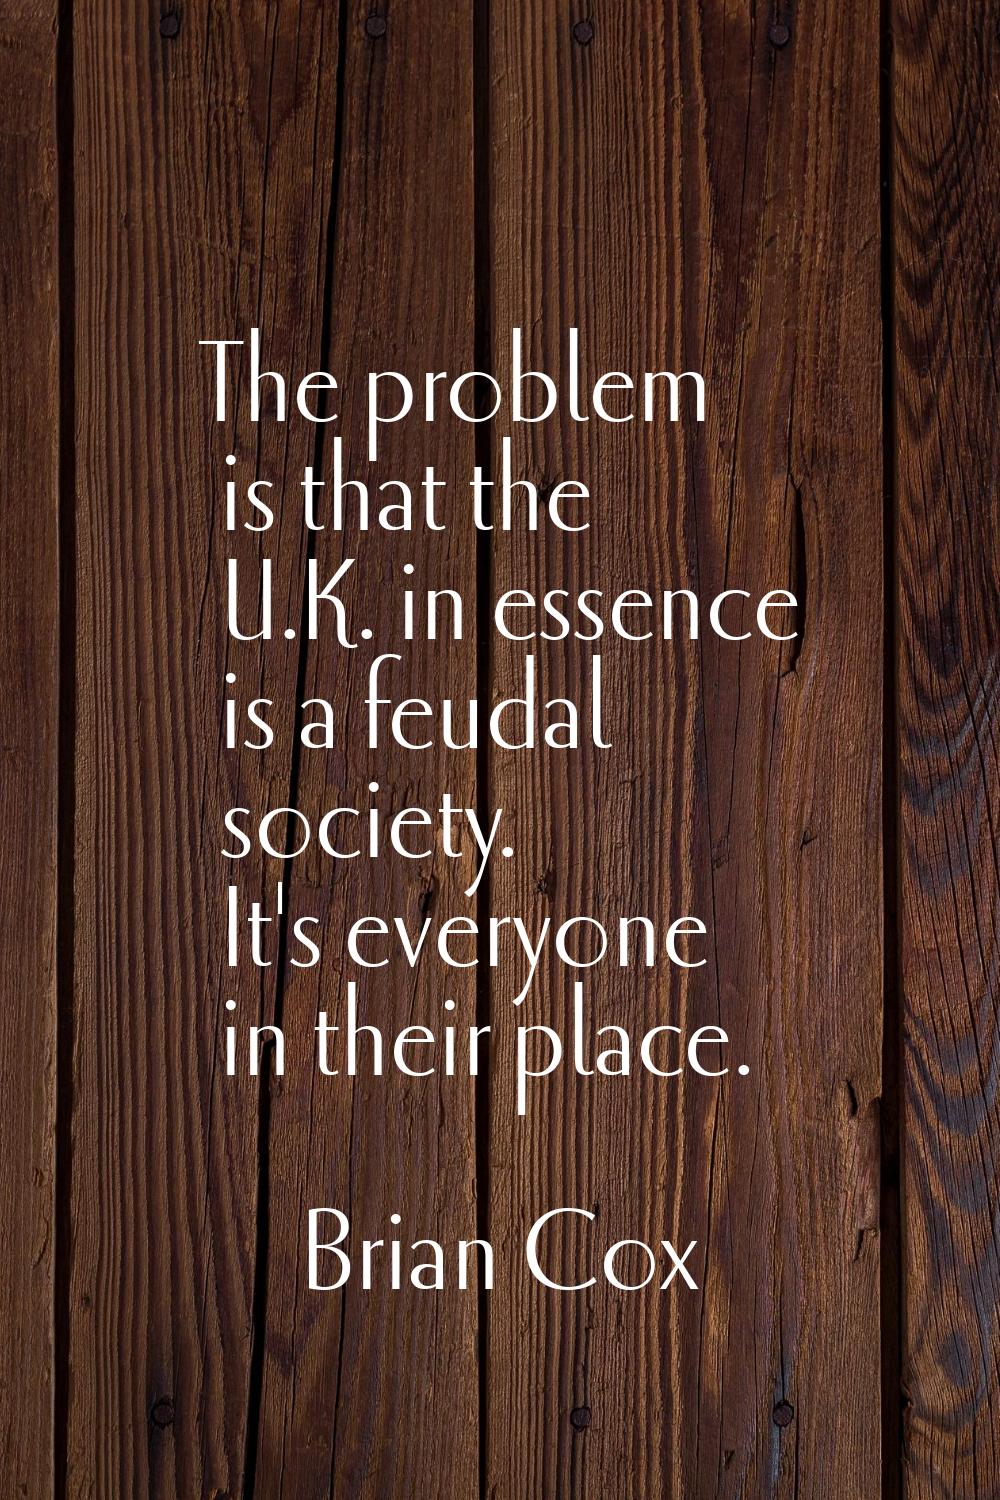 The problem is that the U.K. in essence is a feudal society. It's everyone in their place.